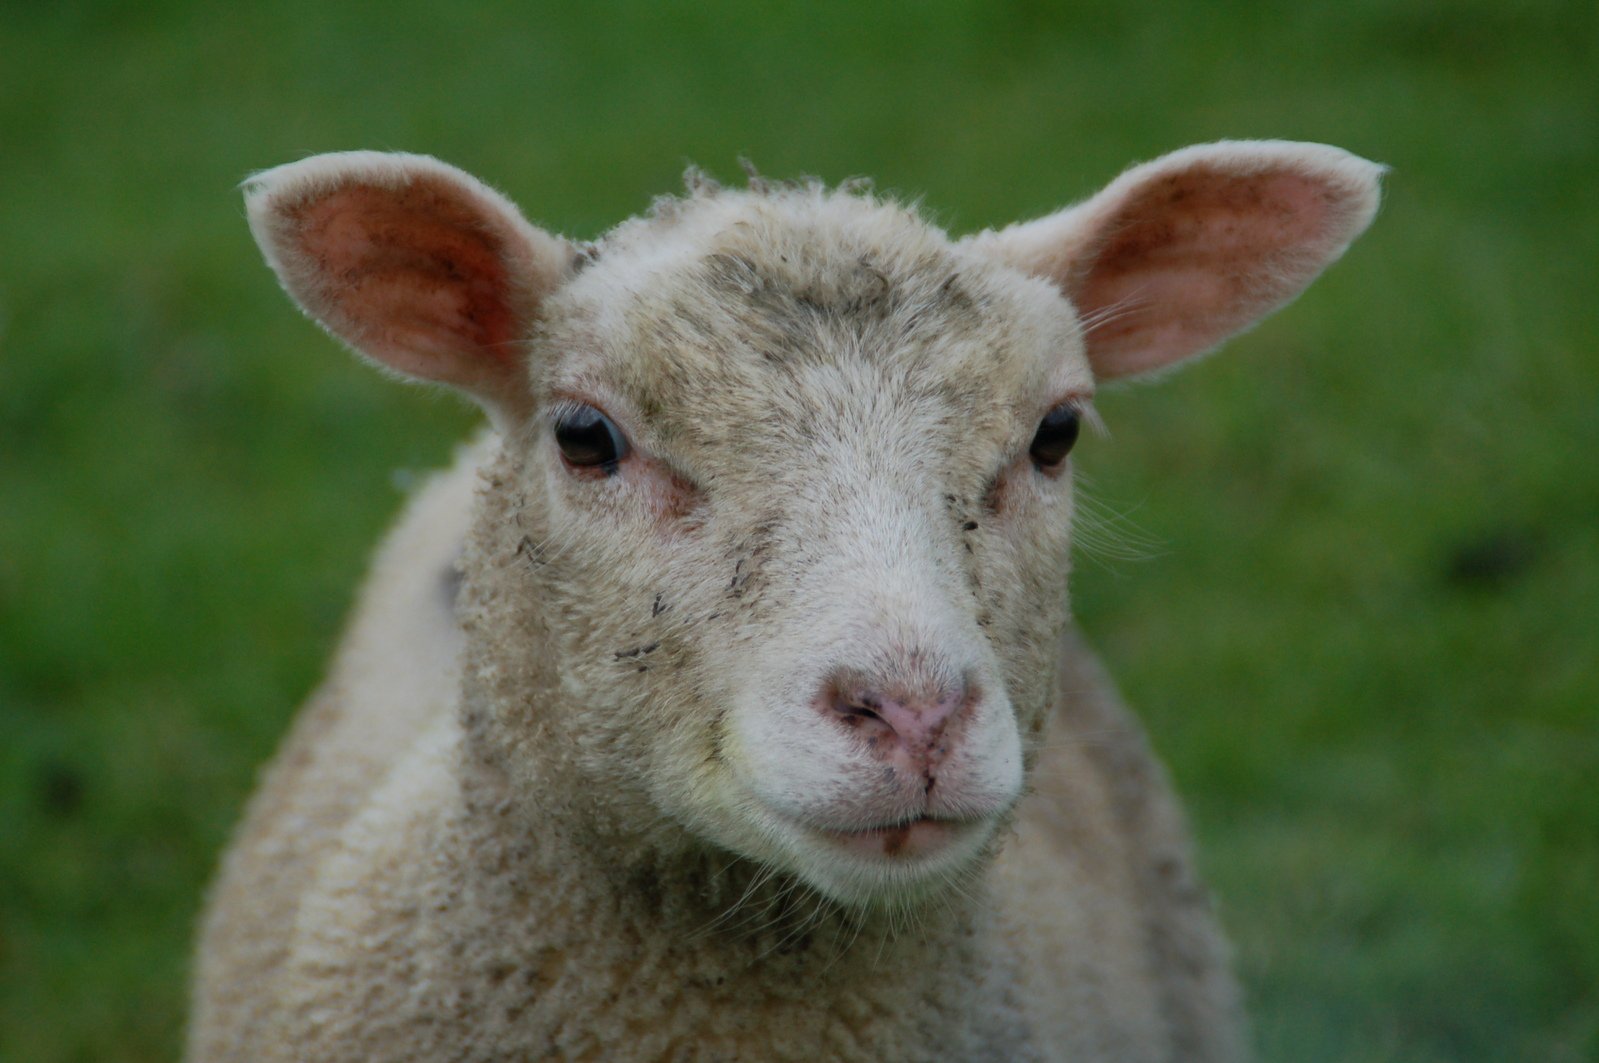 the close up view of a sheep looking at the camera